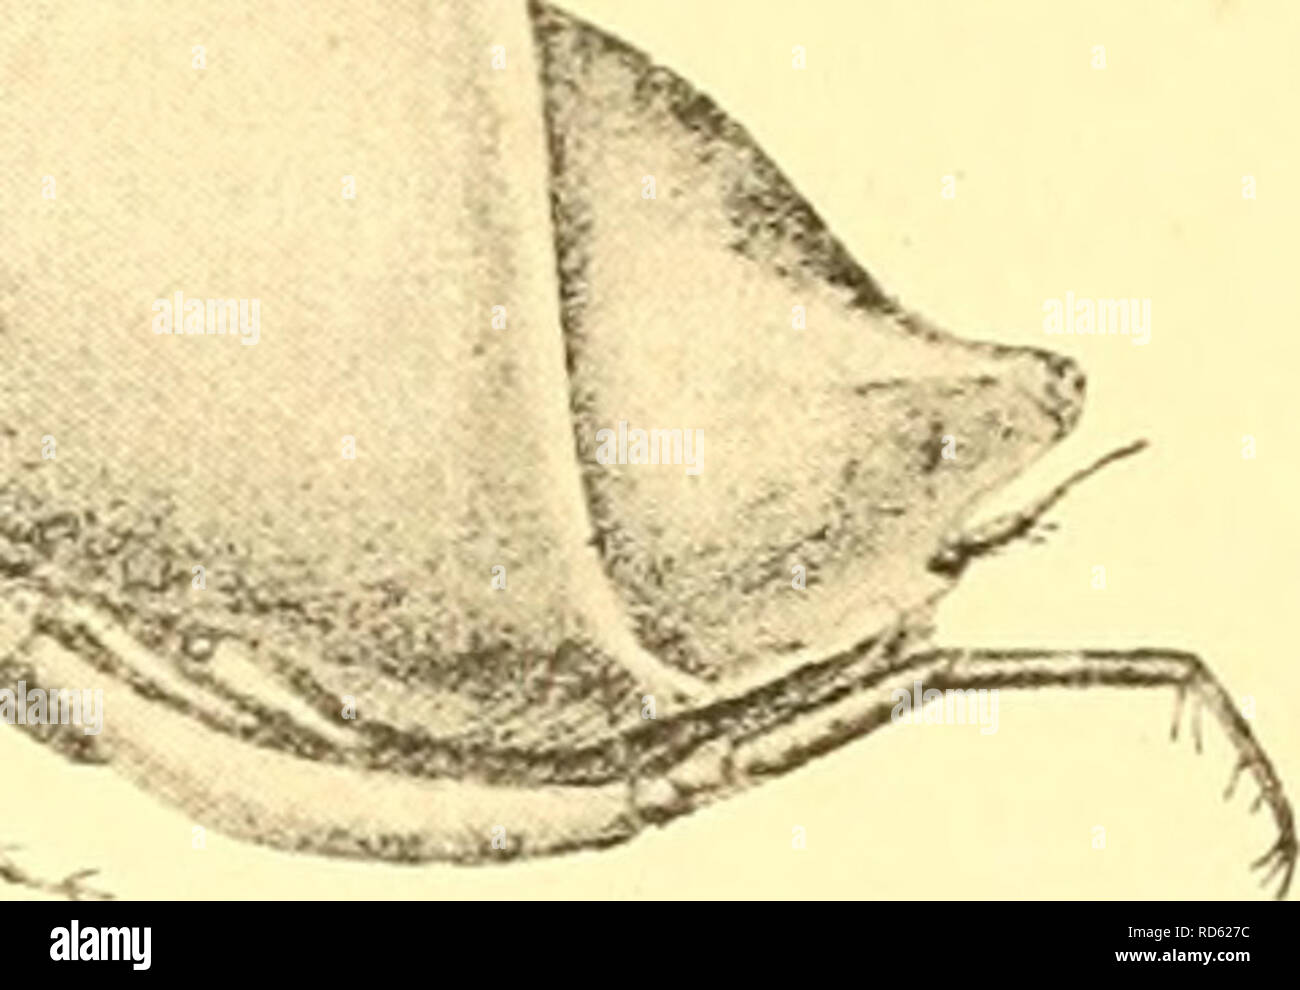 . Cumacea (Sympoda). Cumacea. Fig. 15. C. cingulata (5) Caiman. pleon segments; a median keel extends from the 5^^ pedigerous to the'jS*^ pleon segment, but is feeble at beginning and end of the series. Eyelobe with 11 corneal lenses on the distal end. Antenna 1 with 3^ joint longer than 2&quot;*^, accessory flagellum minute but distinct. Maxilliped 3, 2^^ joint with distal process reaching nearly as far as that of the 4**^ joint, its length without this long process little more than the rest of limb. Peraeopod 1, 2^&quot;^ joint feebly produced at apex, length less than rest of limb, 5^^ and  Stock Photo